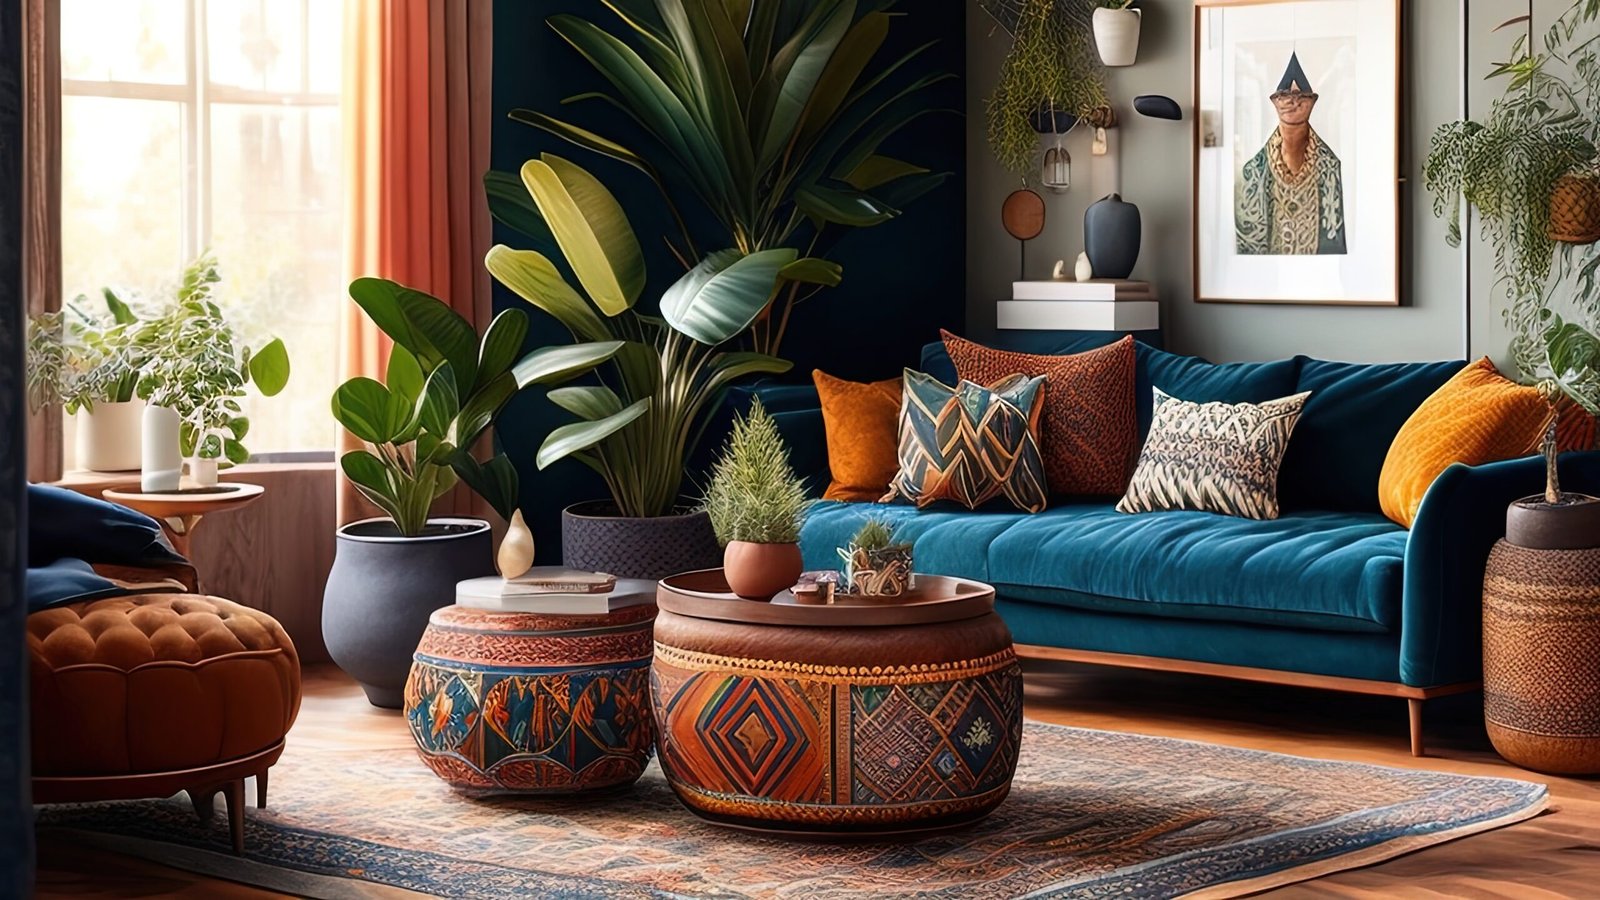 Interior of modern living room with blue sofa, plants and decoration. 